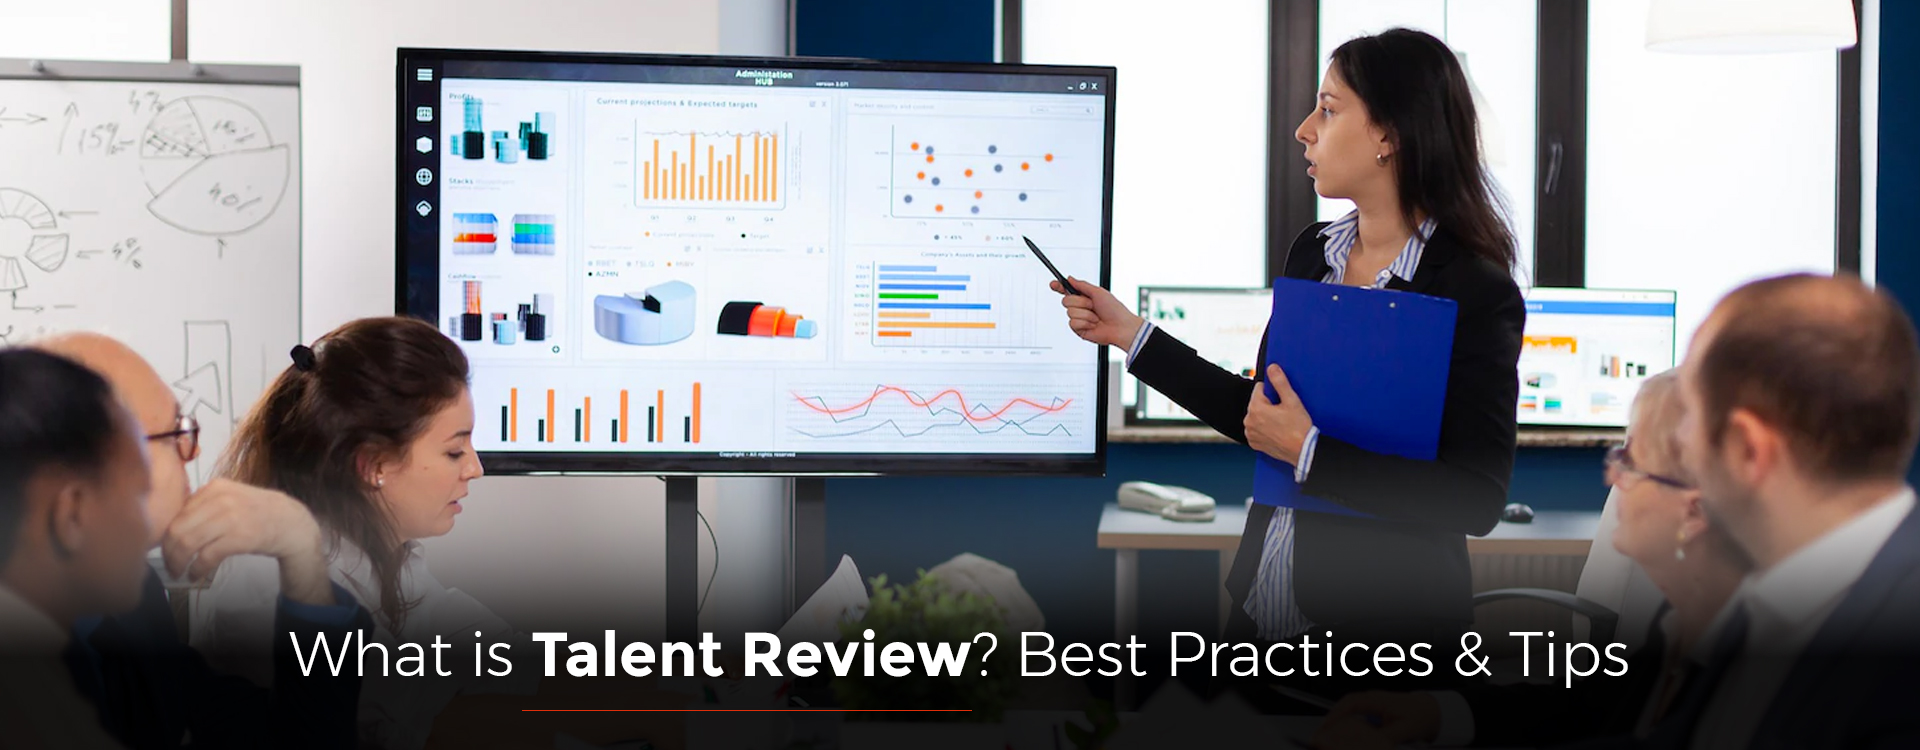 What Is Talent Review? | Best Practices & Tips